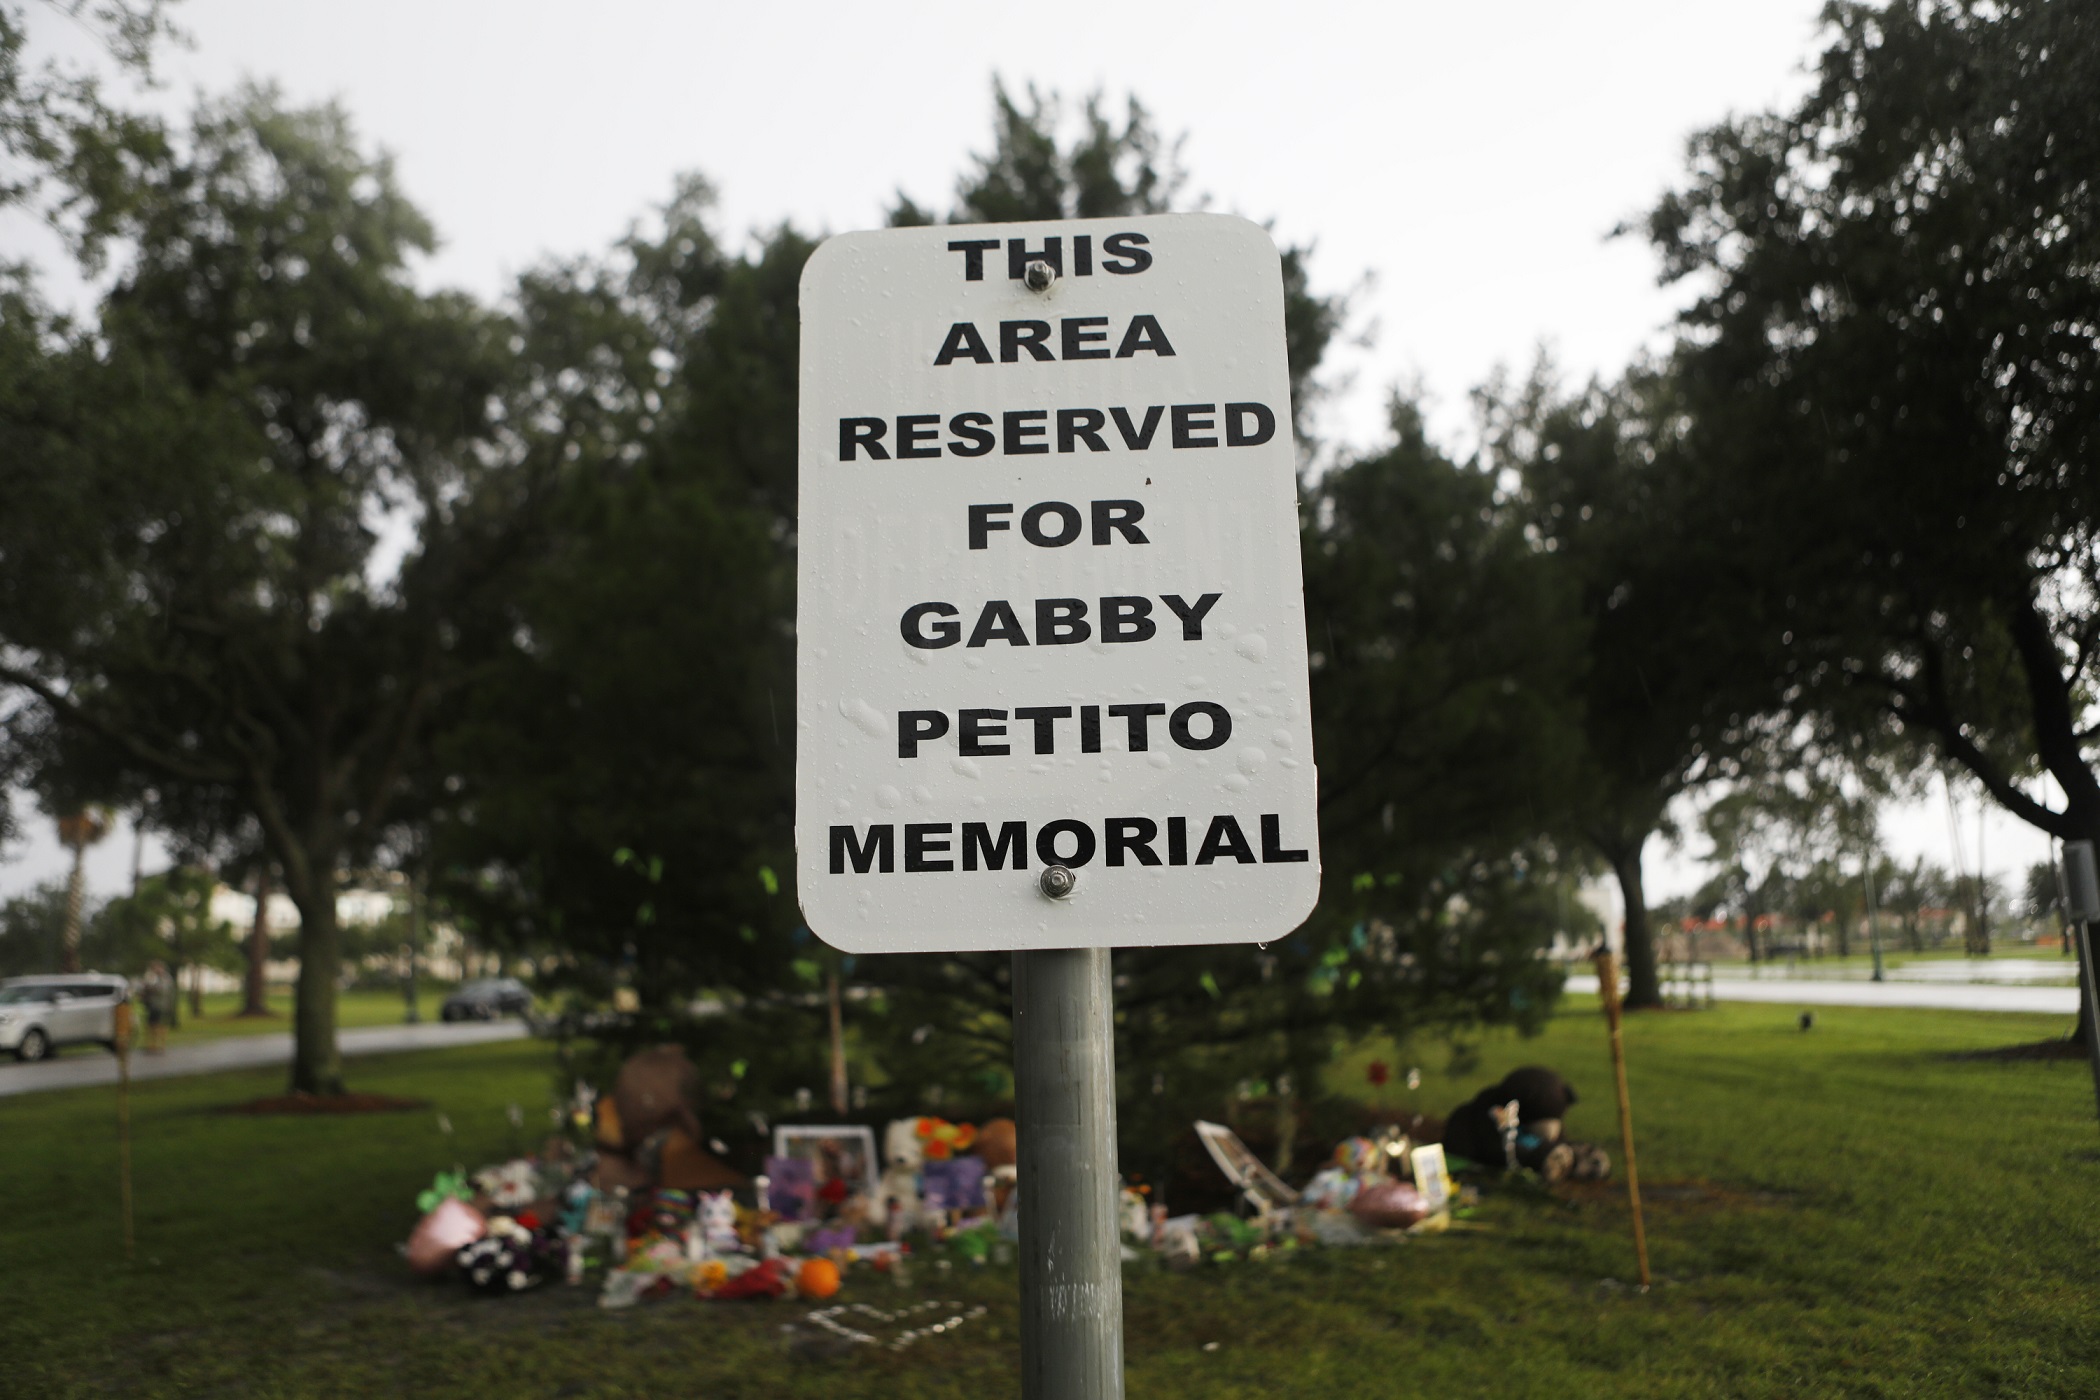 A memorial for Gabby Petito grows in North Port, Florida while authorities search for her boyfriend, Brian Laundrie